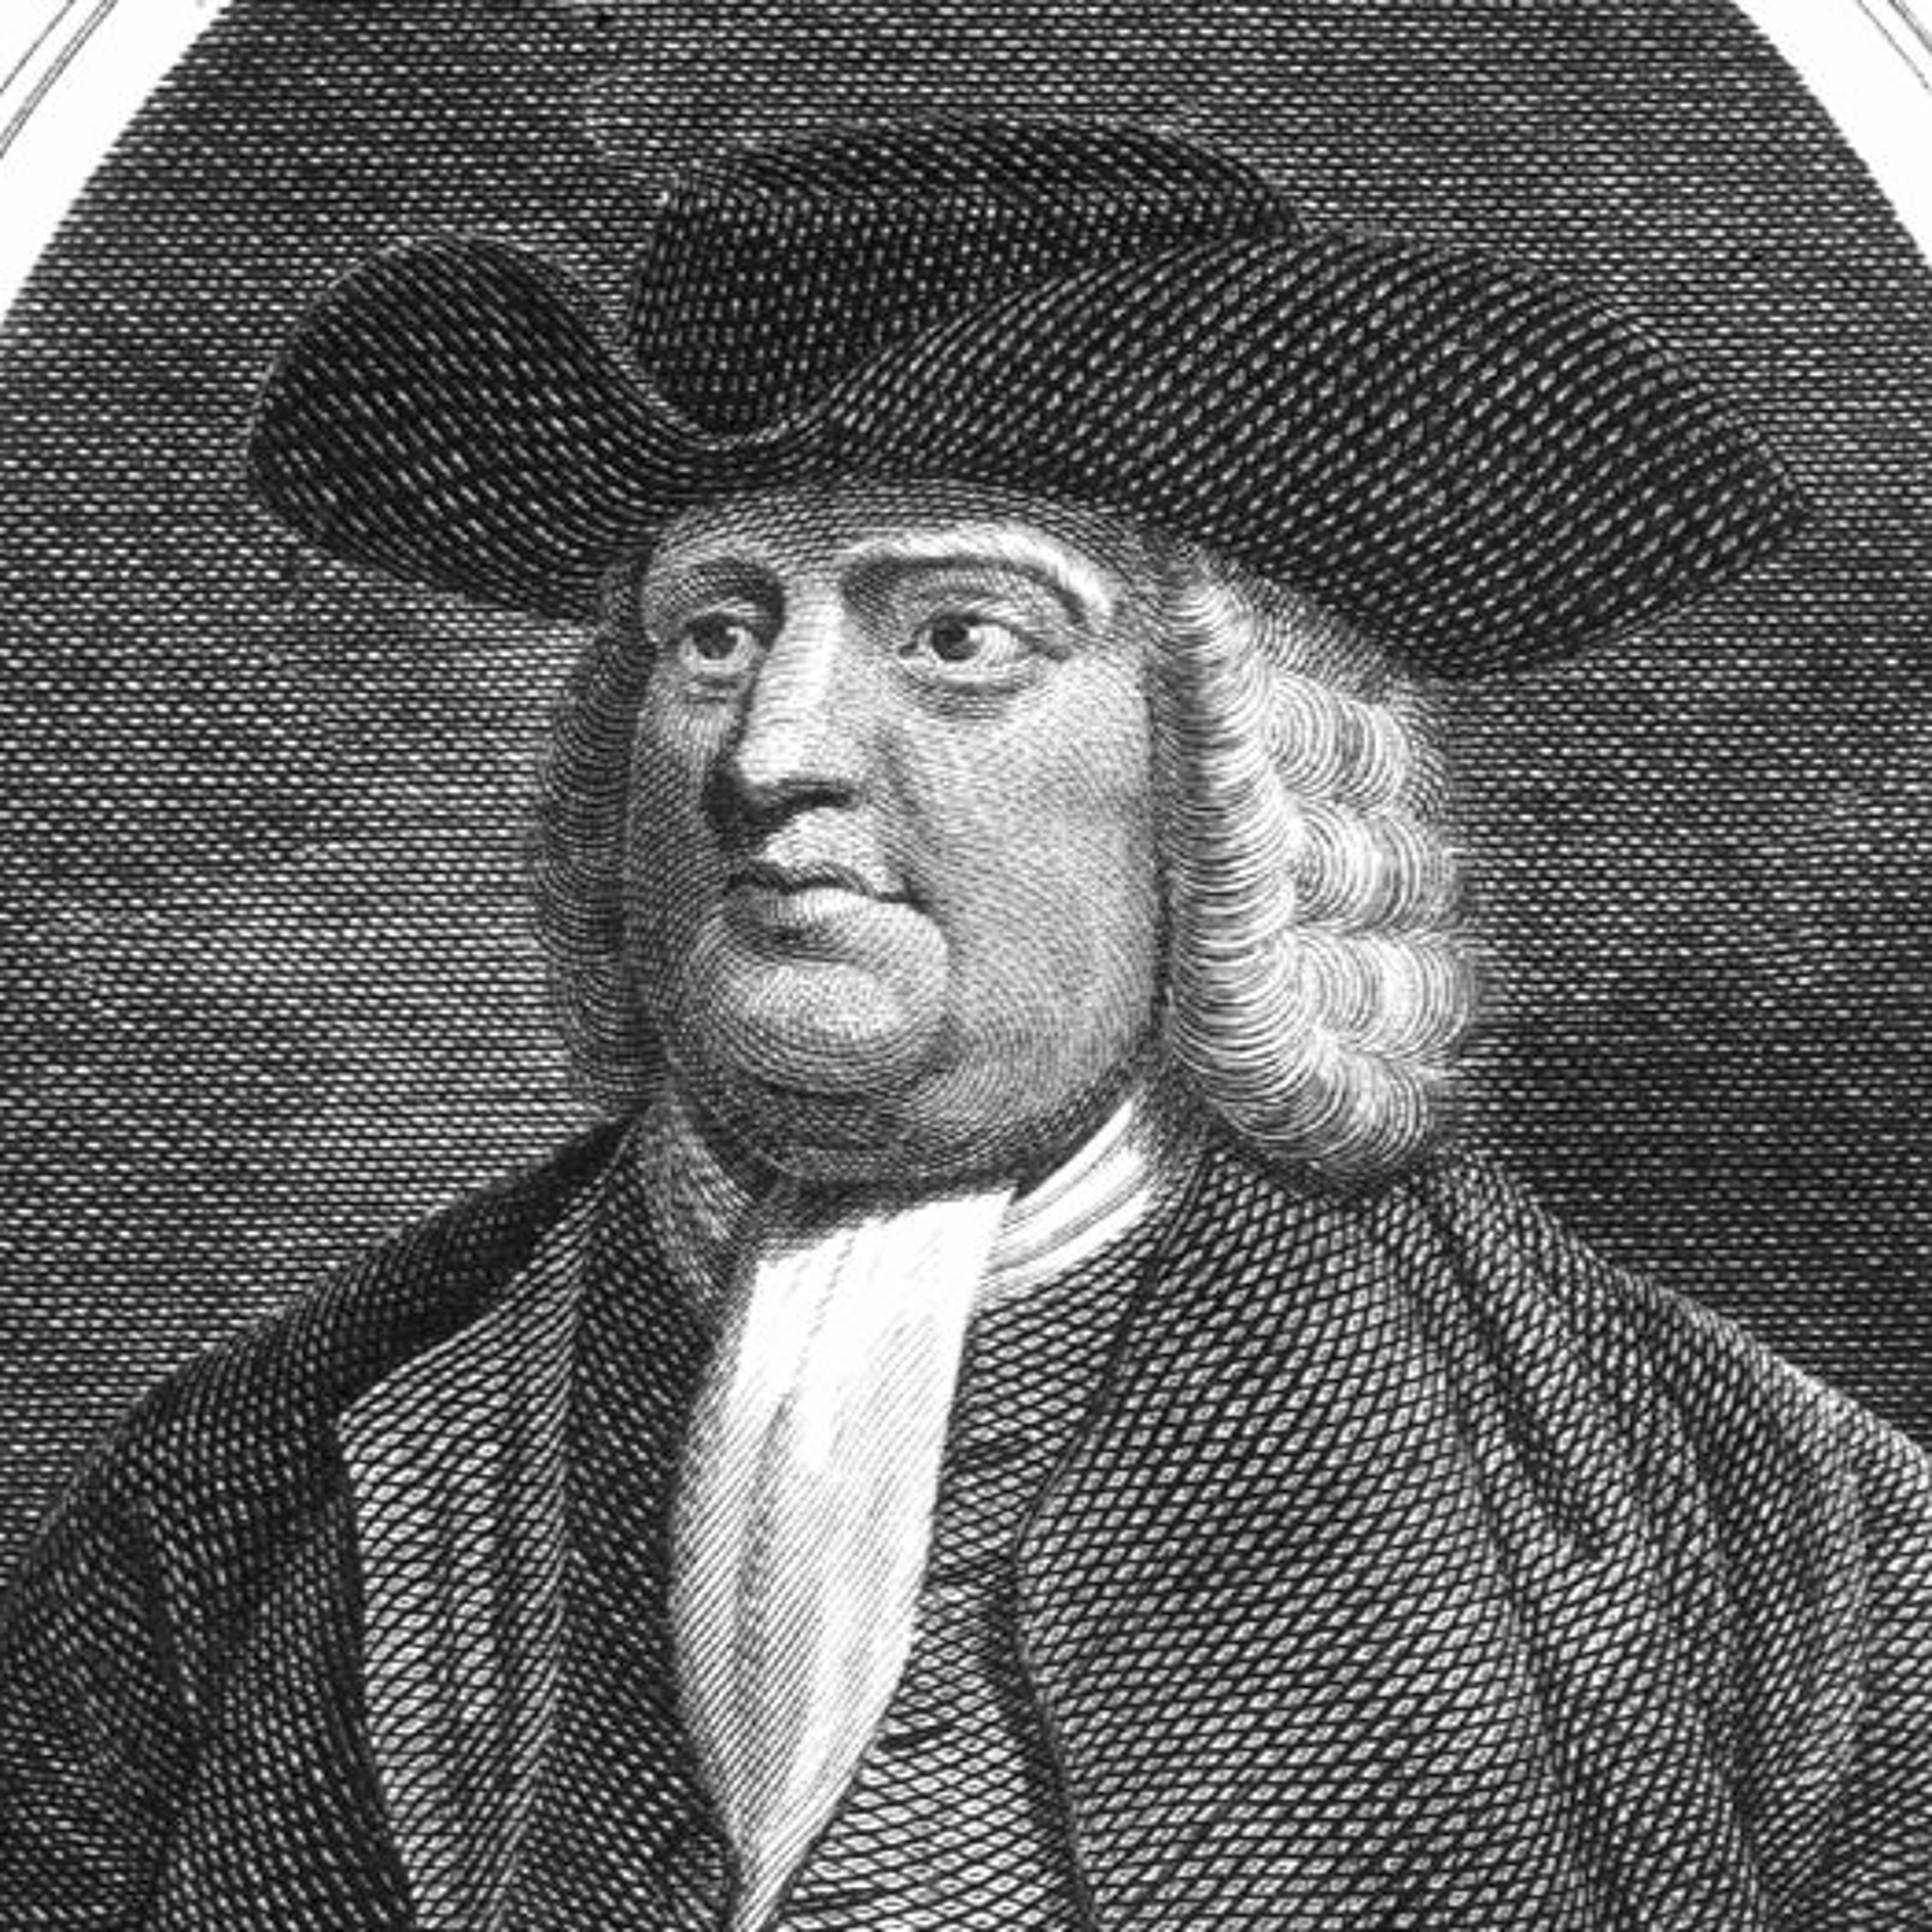 Hillsdale Dialogues 03-12-21 William Penn & The Frame of Government of Pennsylvania